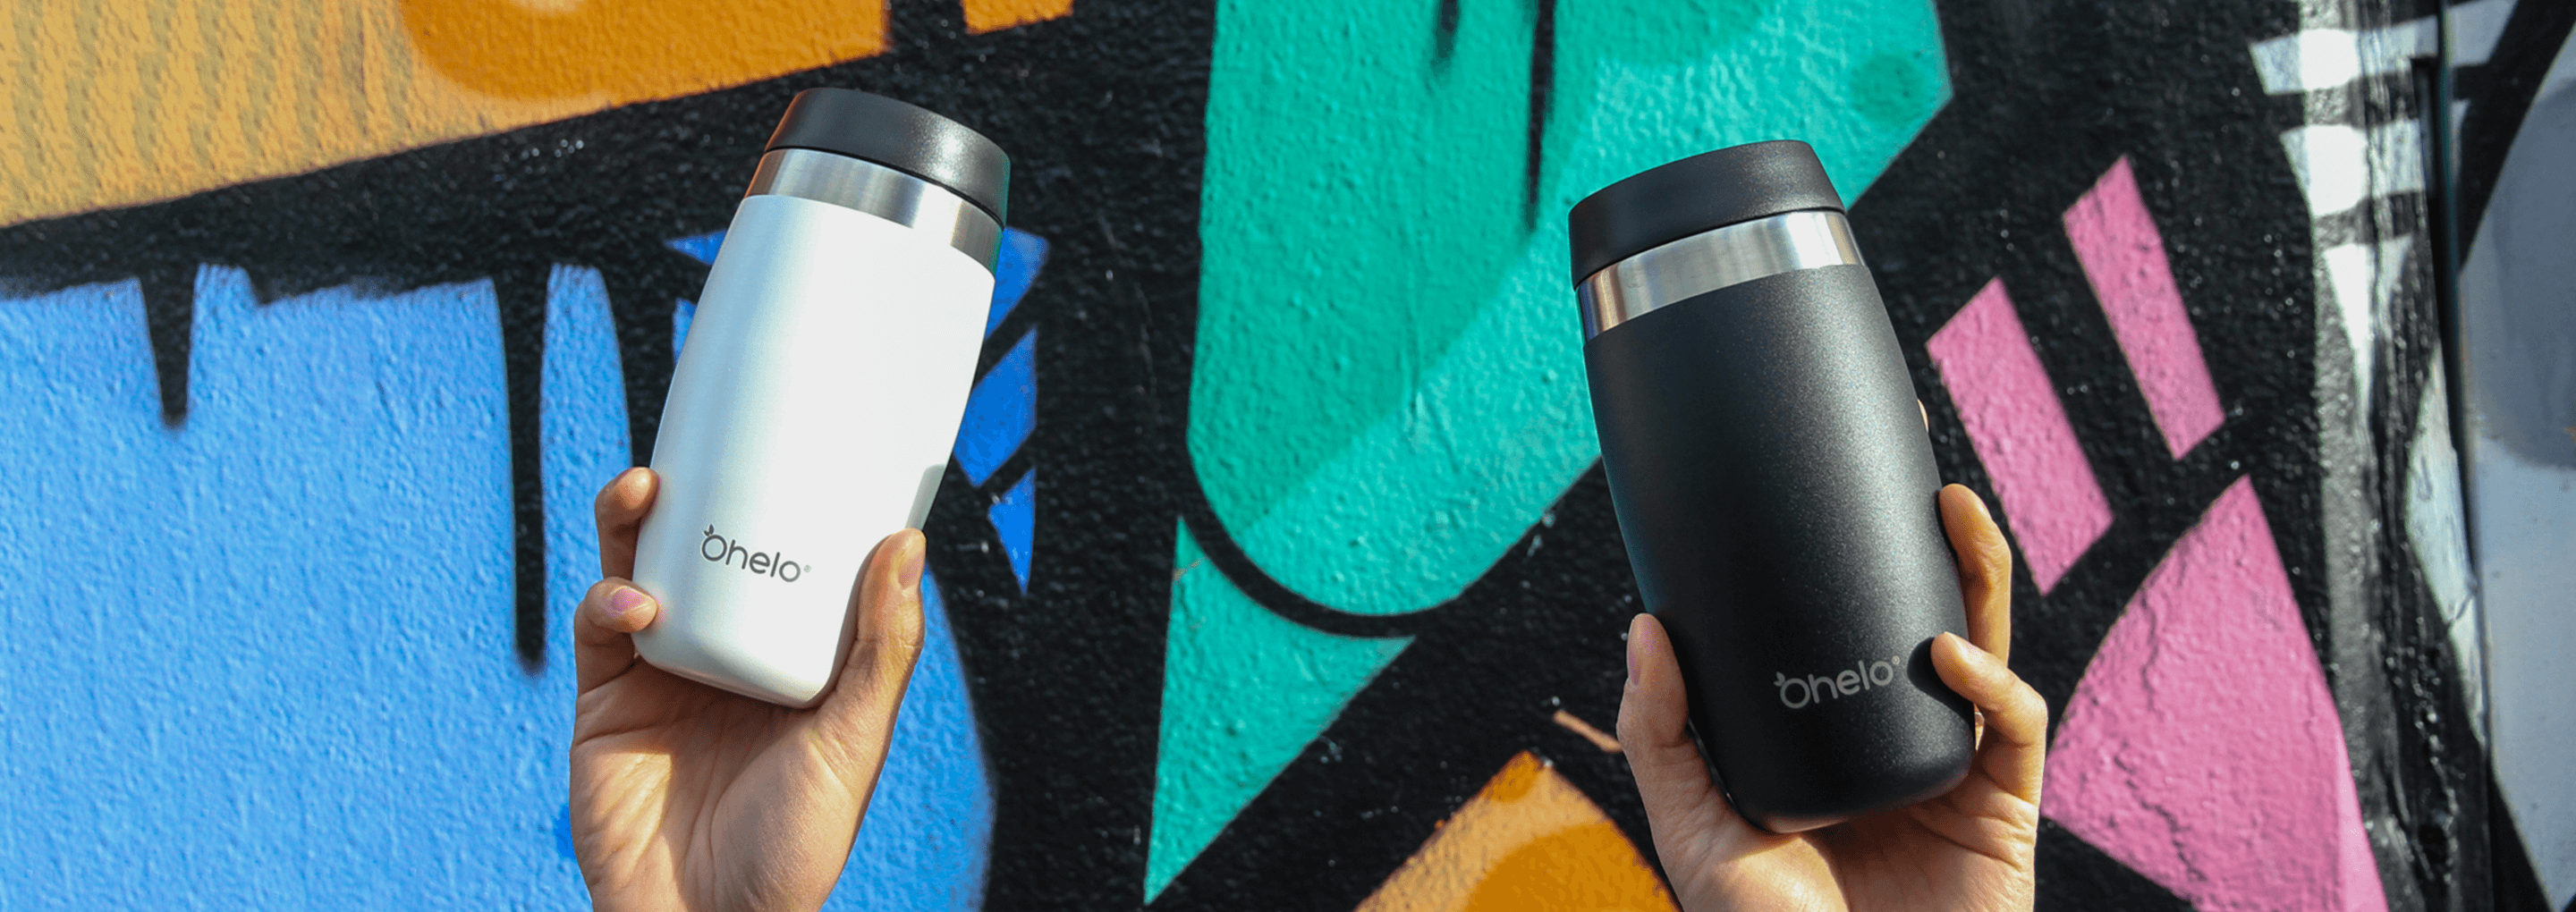 Five reasons why you should switch to a reusable coffee cup - Which? News